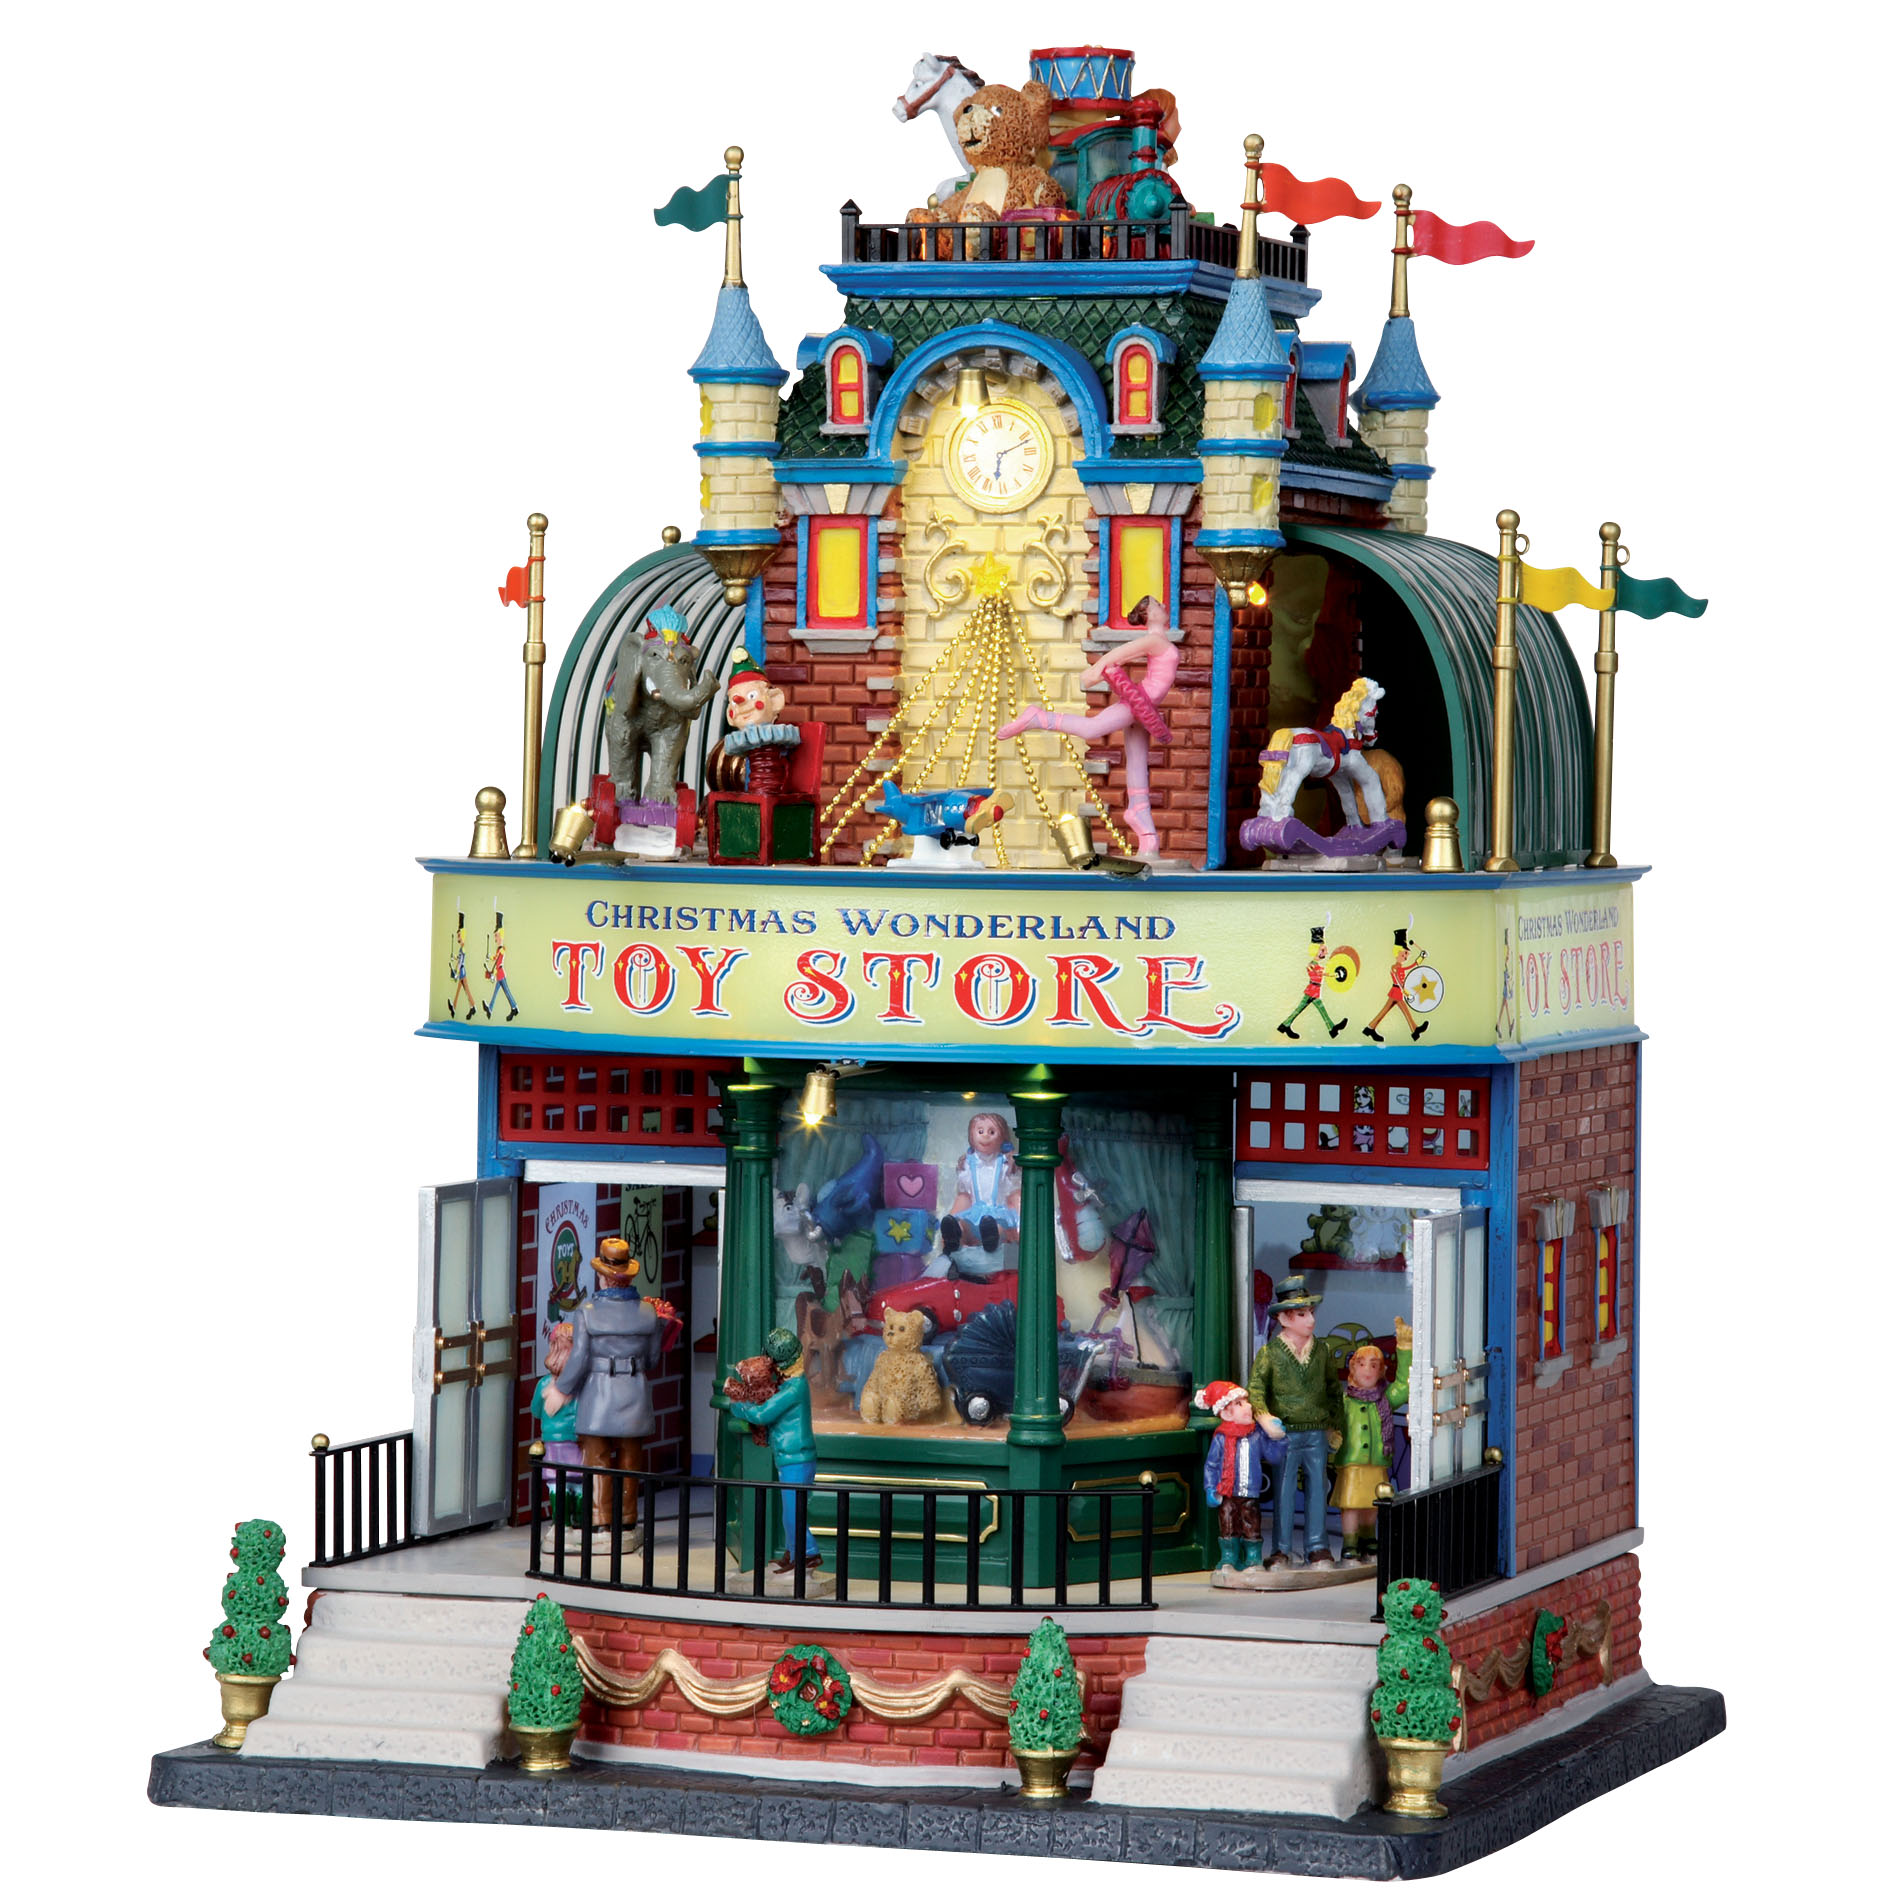 Christmas Village Building  Christmas Wonderland Toy Store  With 4.5V Adaptor